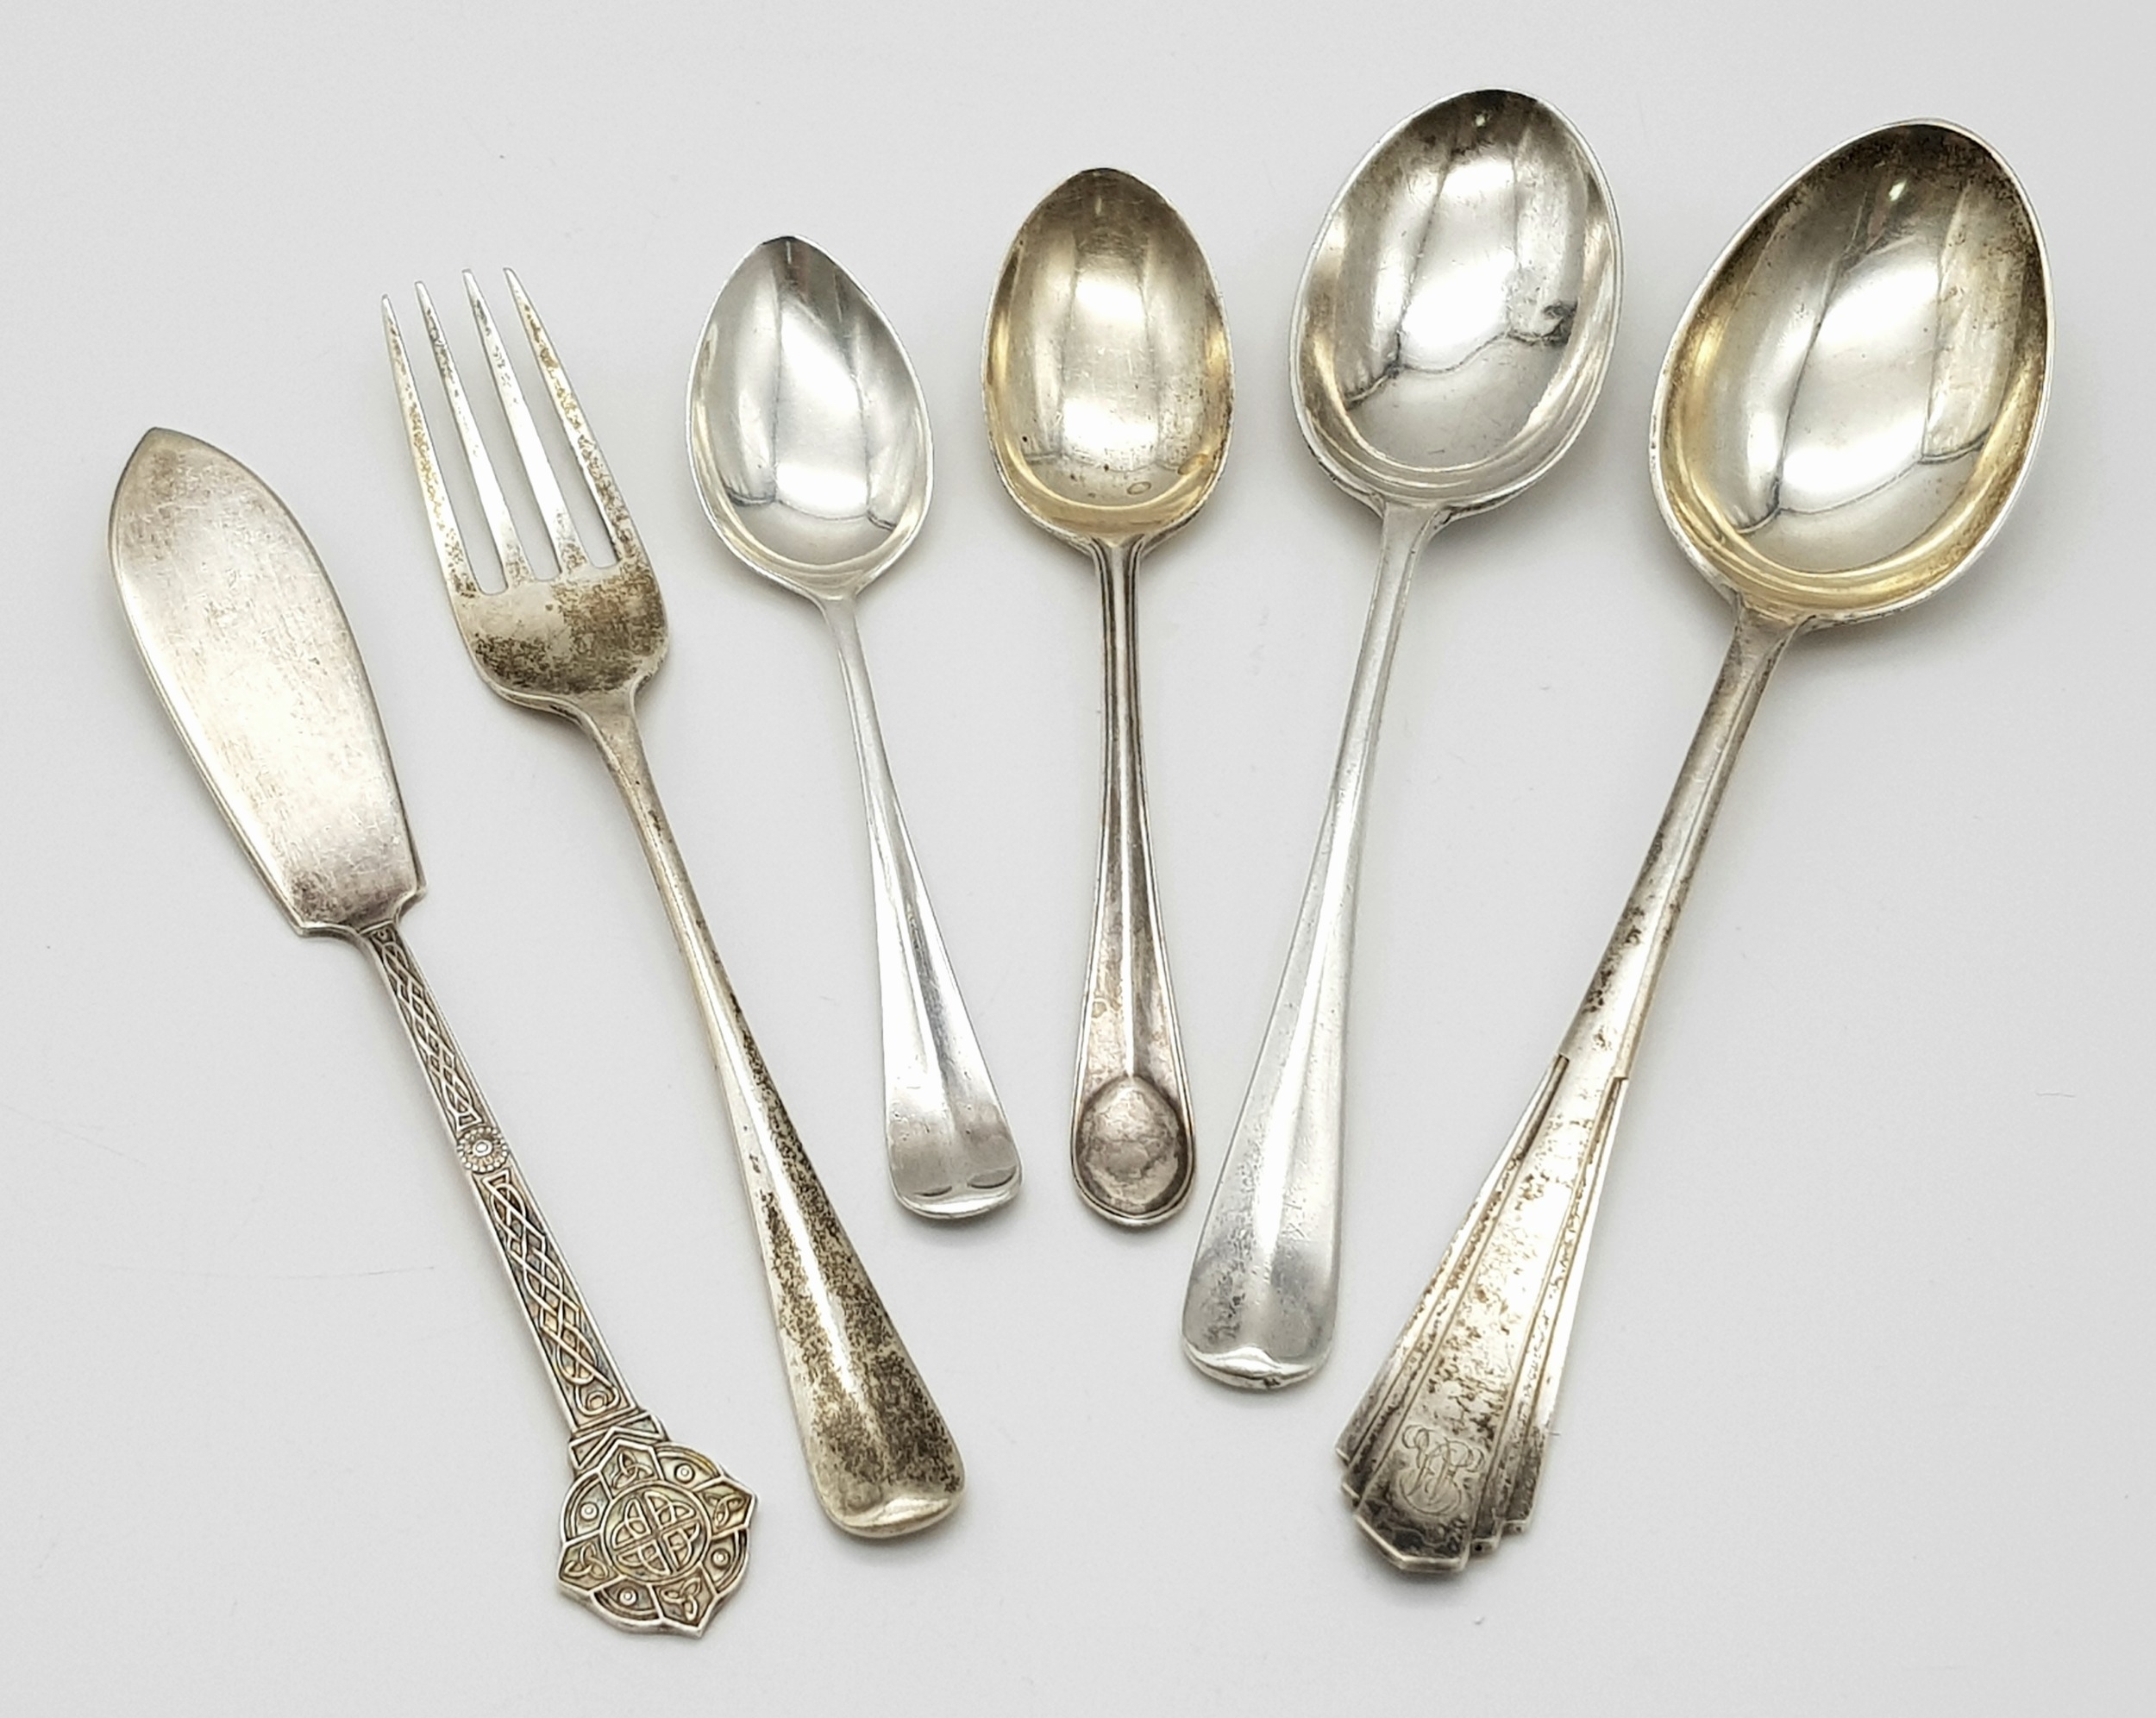 A Small Selection of Sterling Silver Flatware: 2 x teaspoon, 2 x spoon fish knife and fork. All - Image 3 of 5